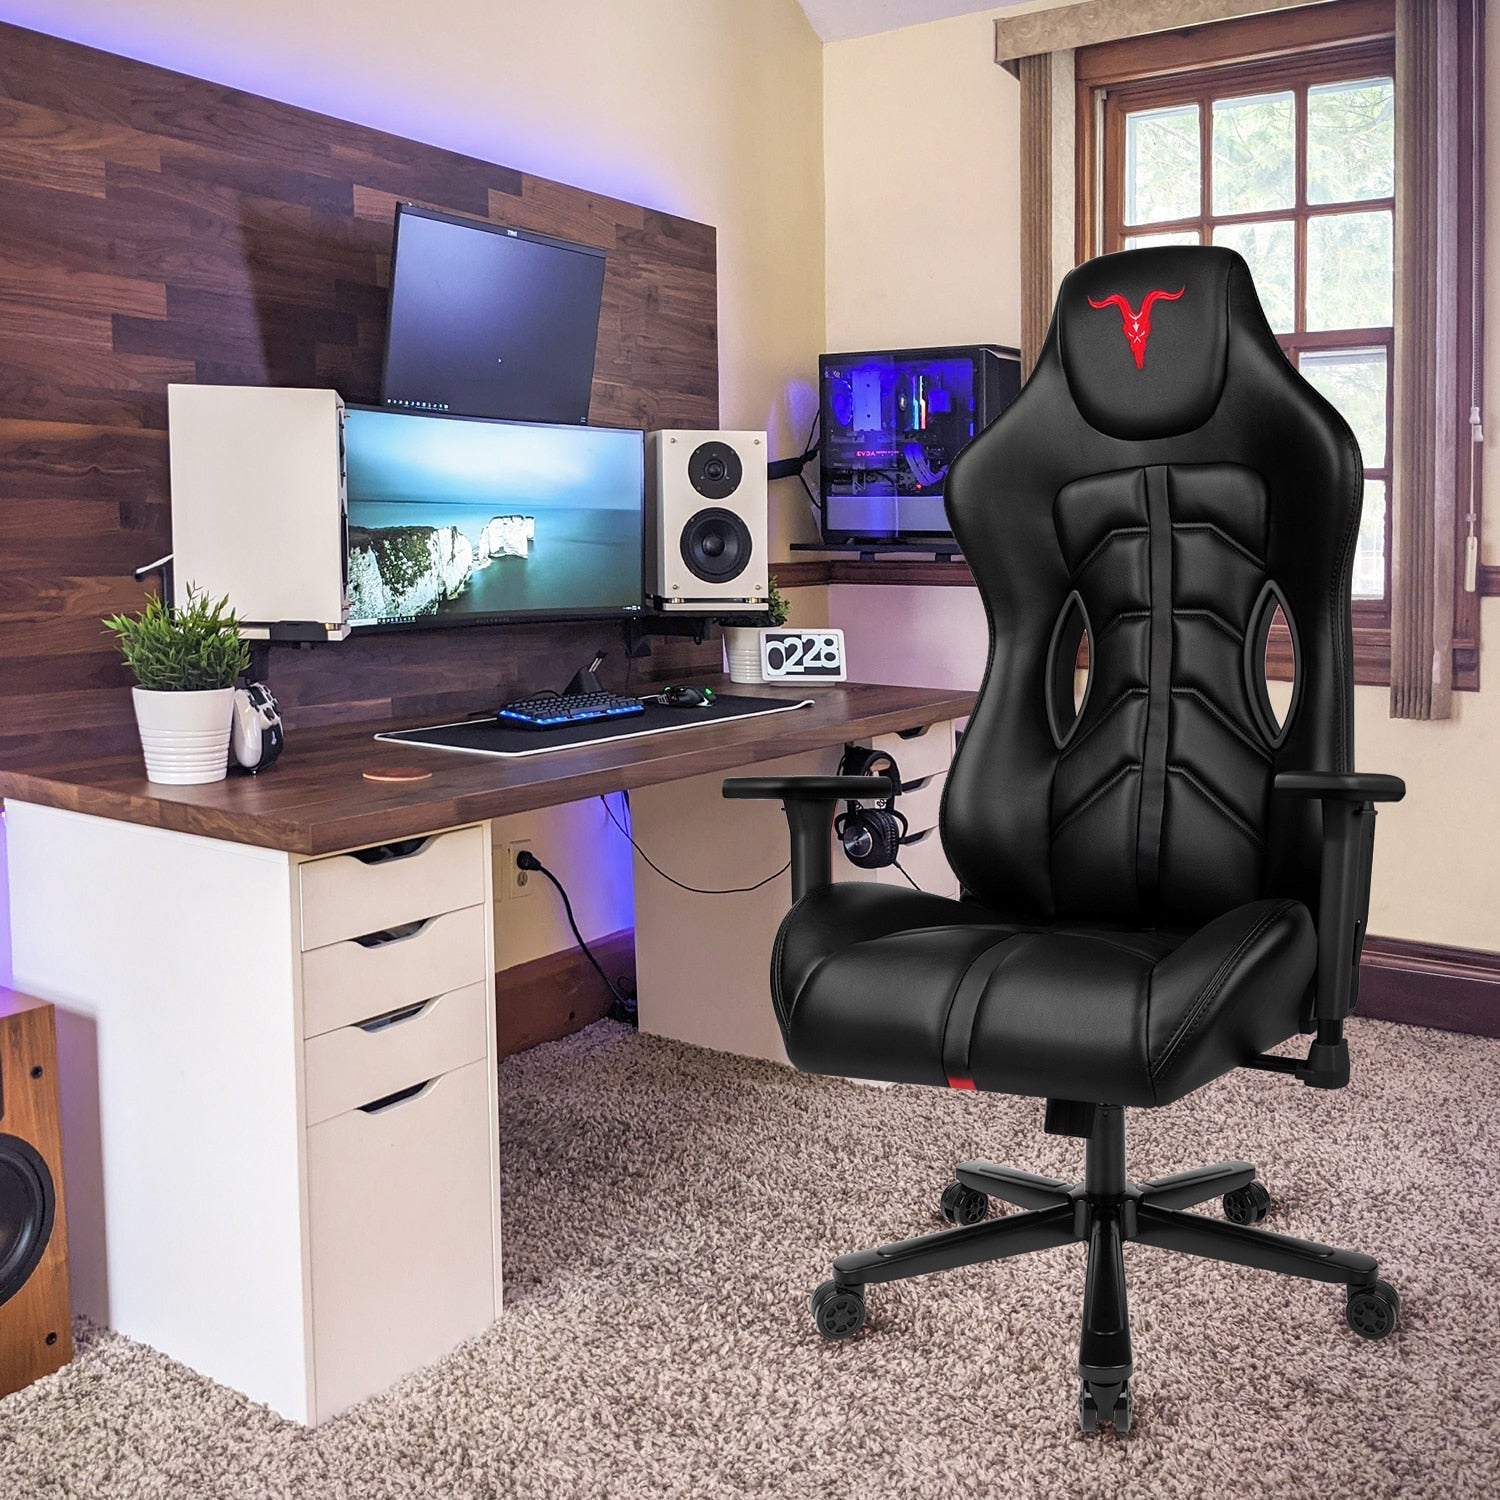 Ergonomic Gaming PU Leather Office Chair